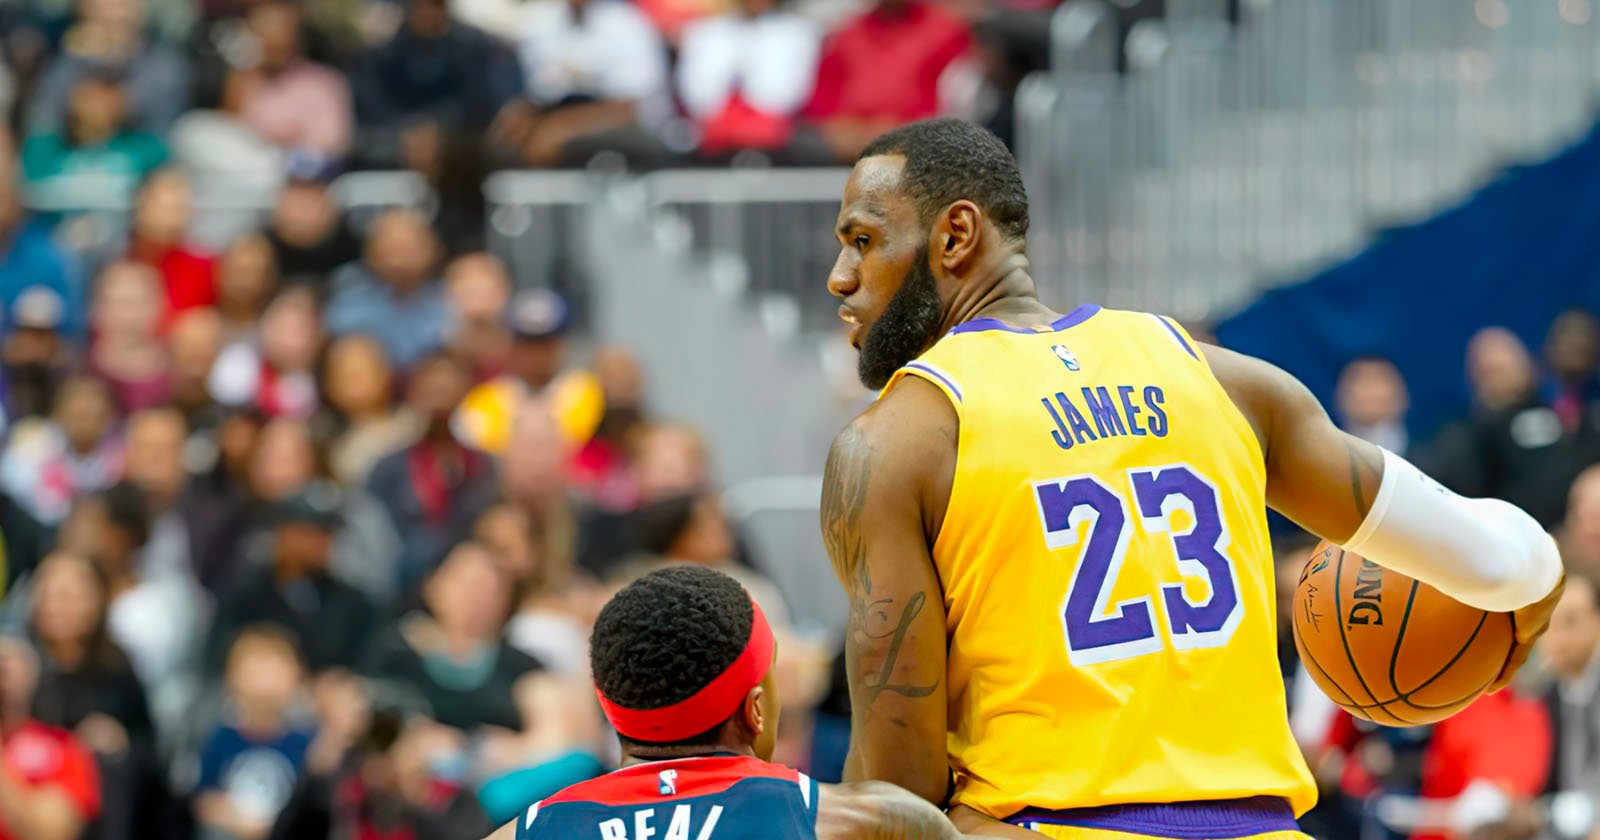 LeBron James Slams Photog with $1M Countersuit in Copyright Fight